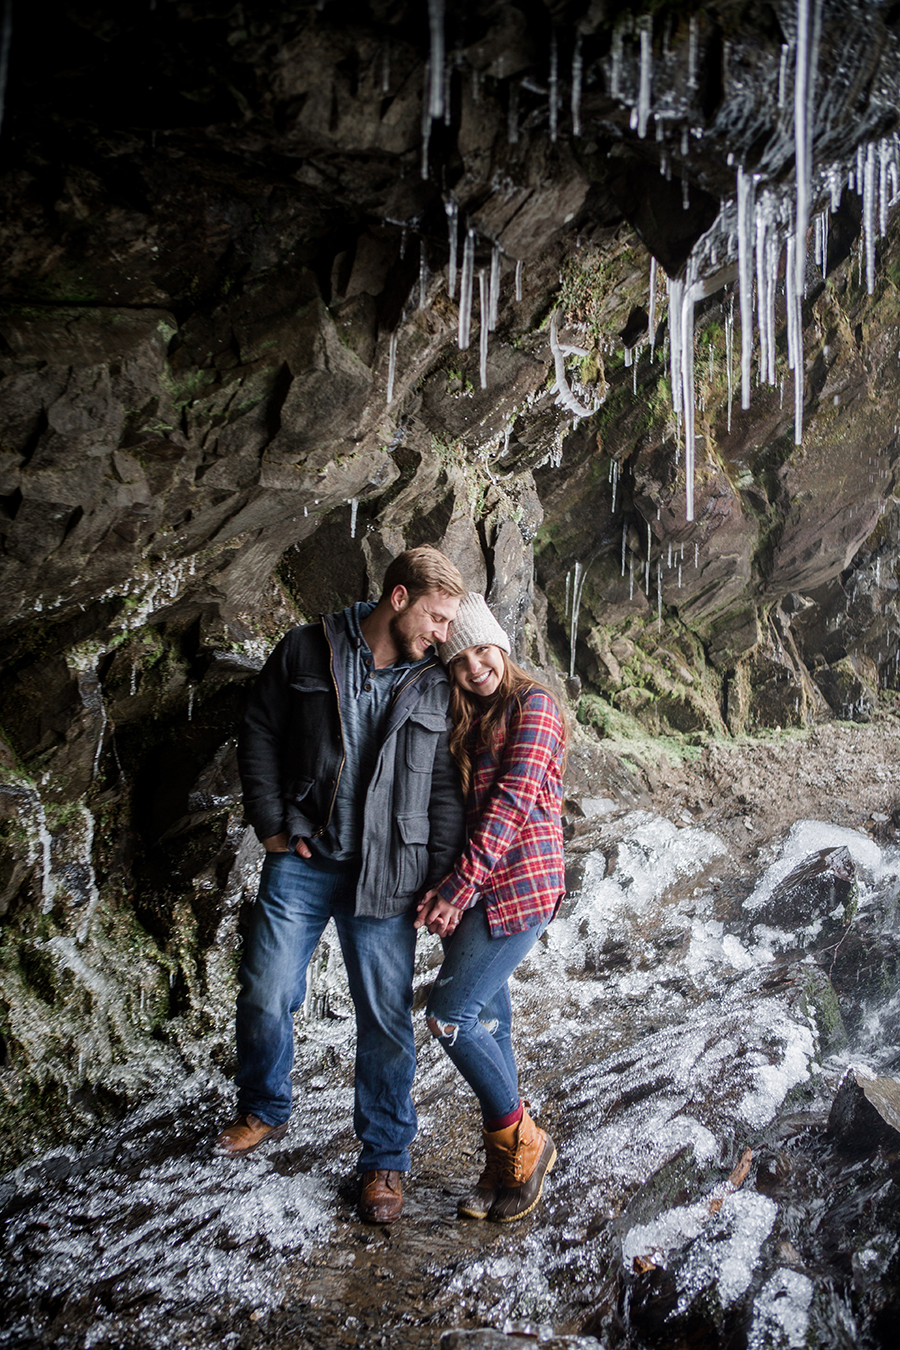 Standing under the icecycles engagement photo by Knoxville Wedding Photographer, Amanda May Photos.